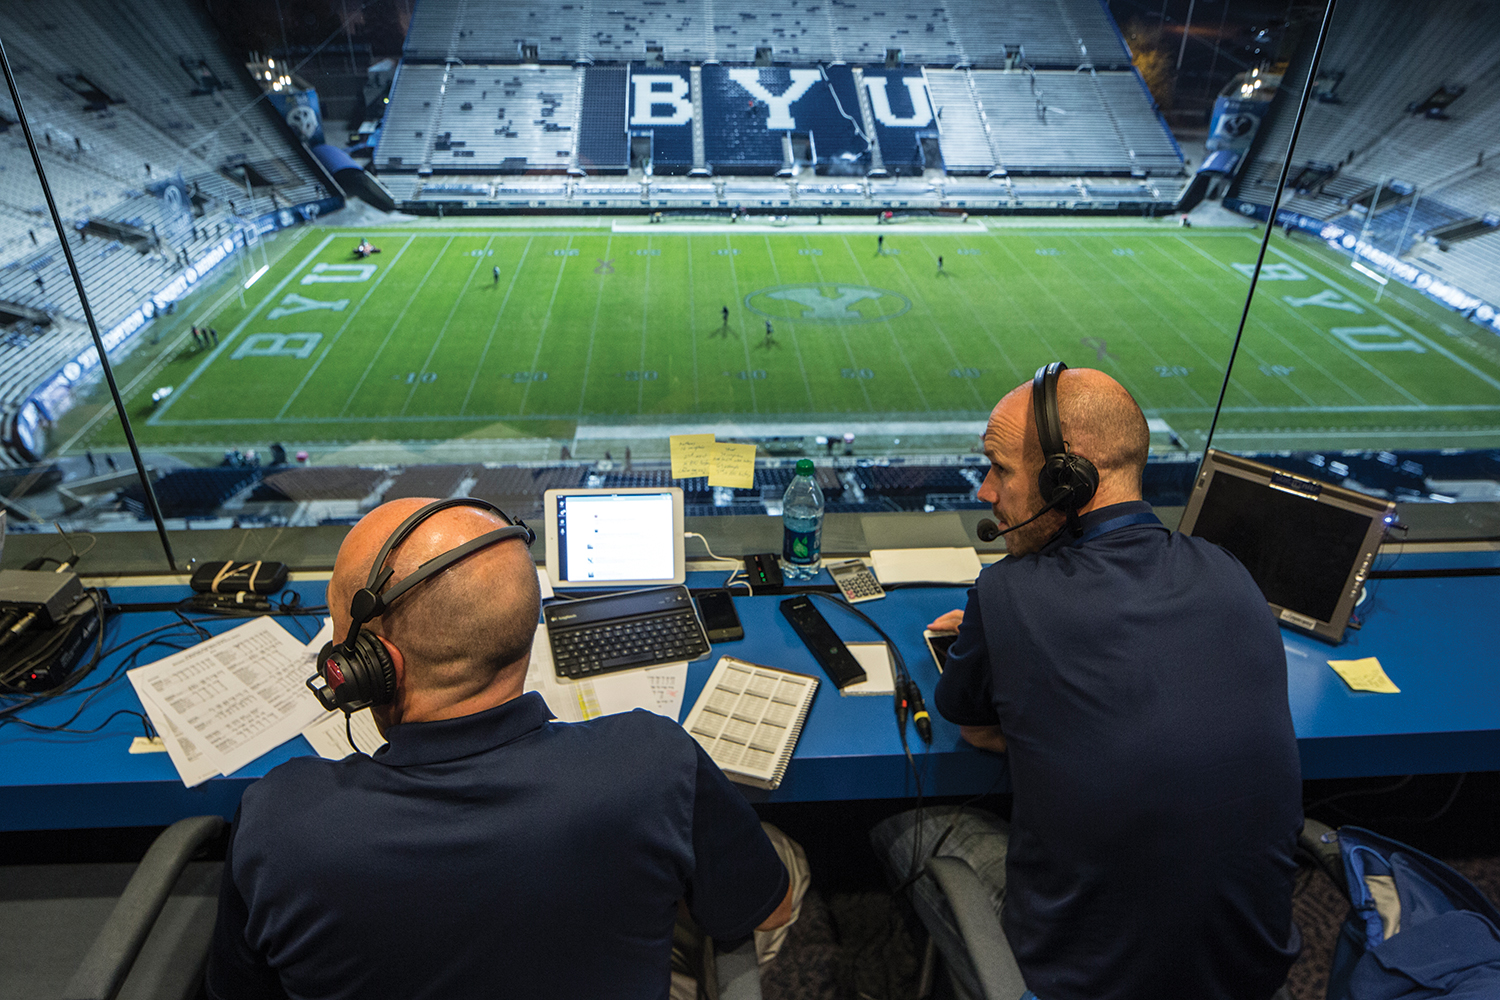 Greg Wrubell, the Voice of the Cougars, and one of his broadcasting partners discuss the game high over the LaVell Edwards Stadium field.